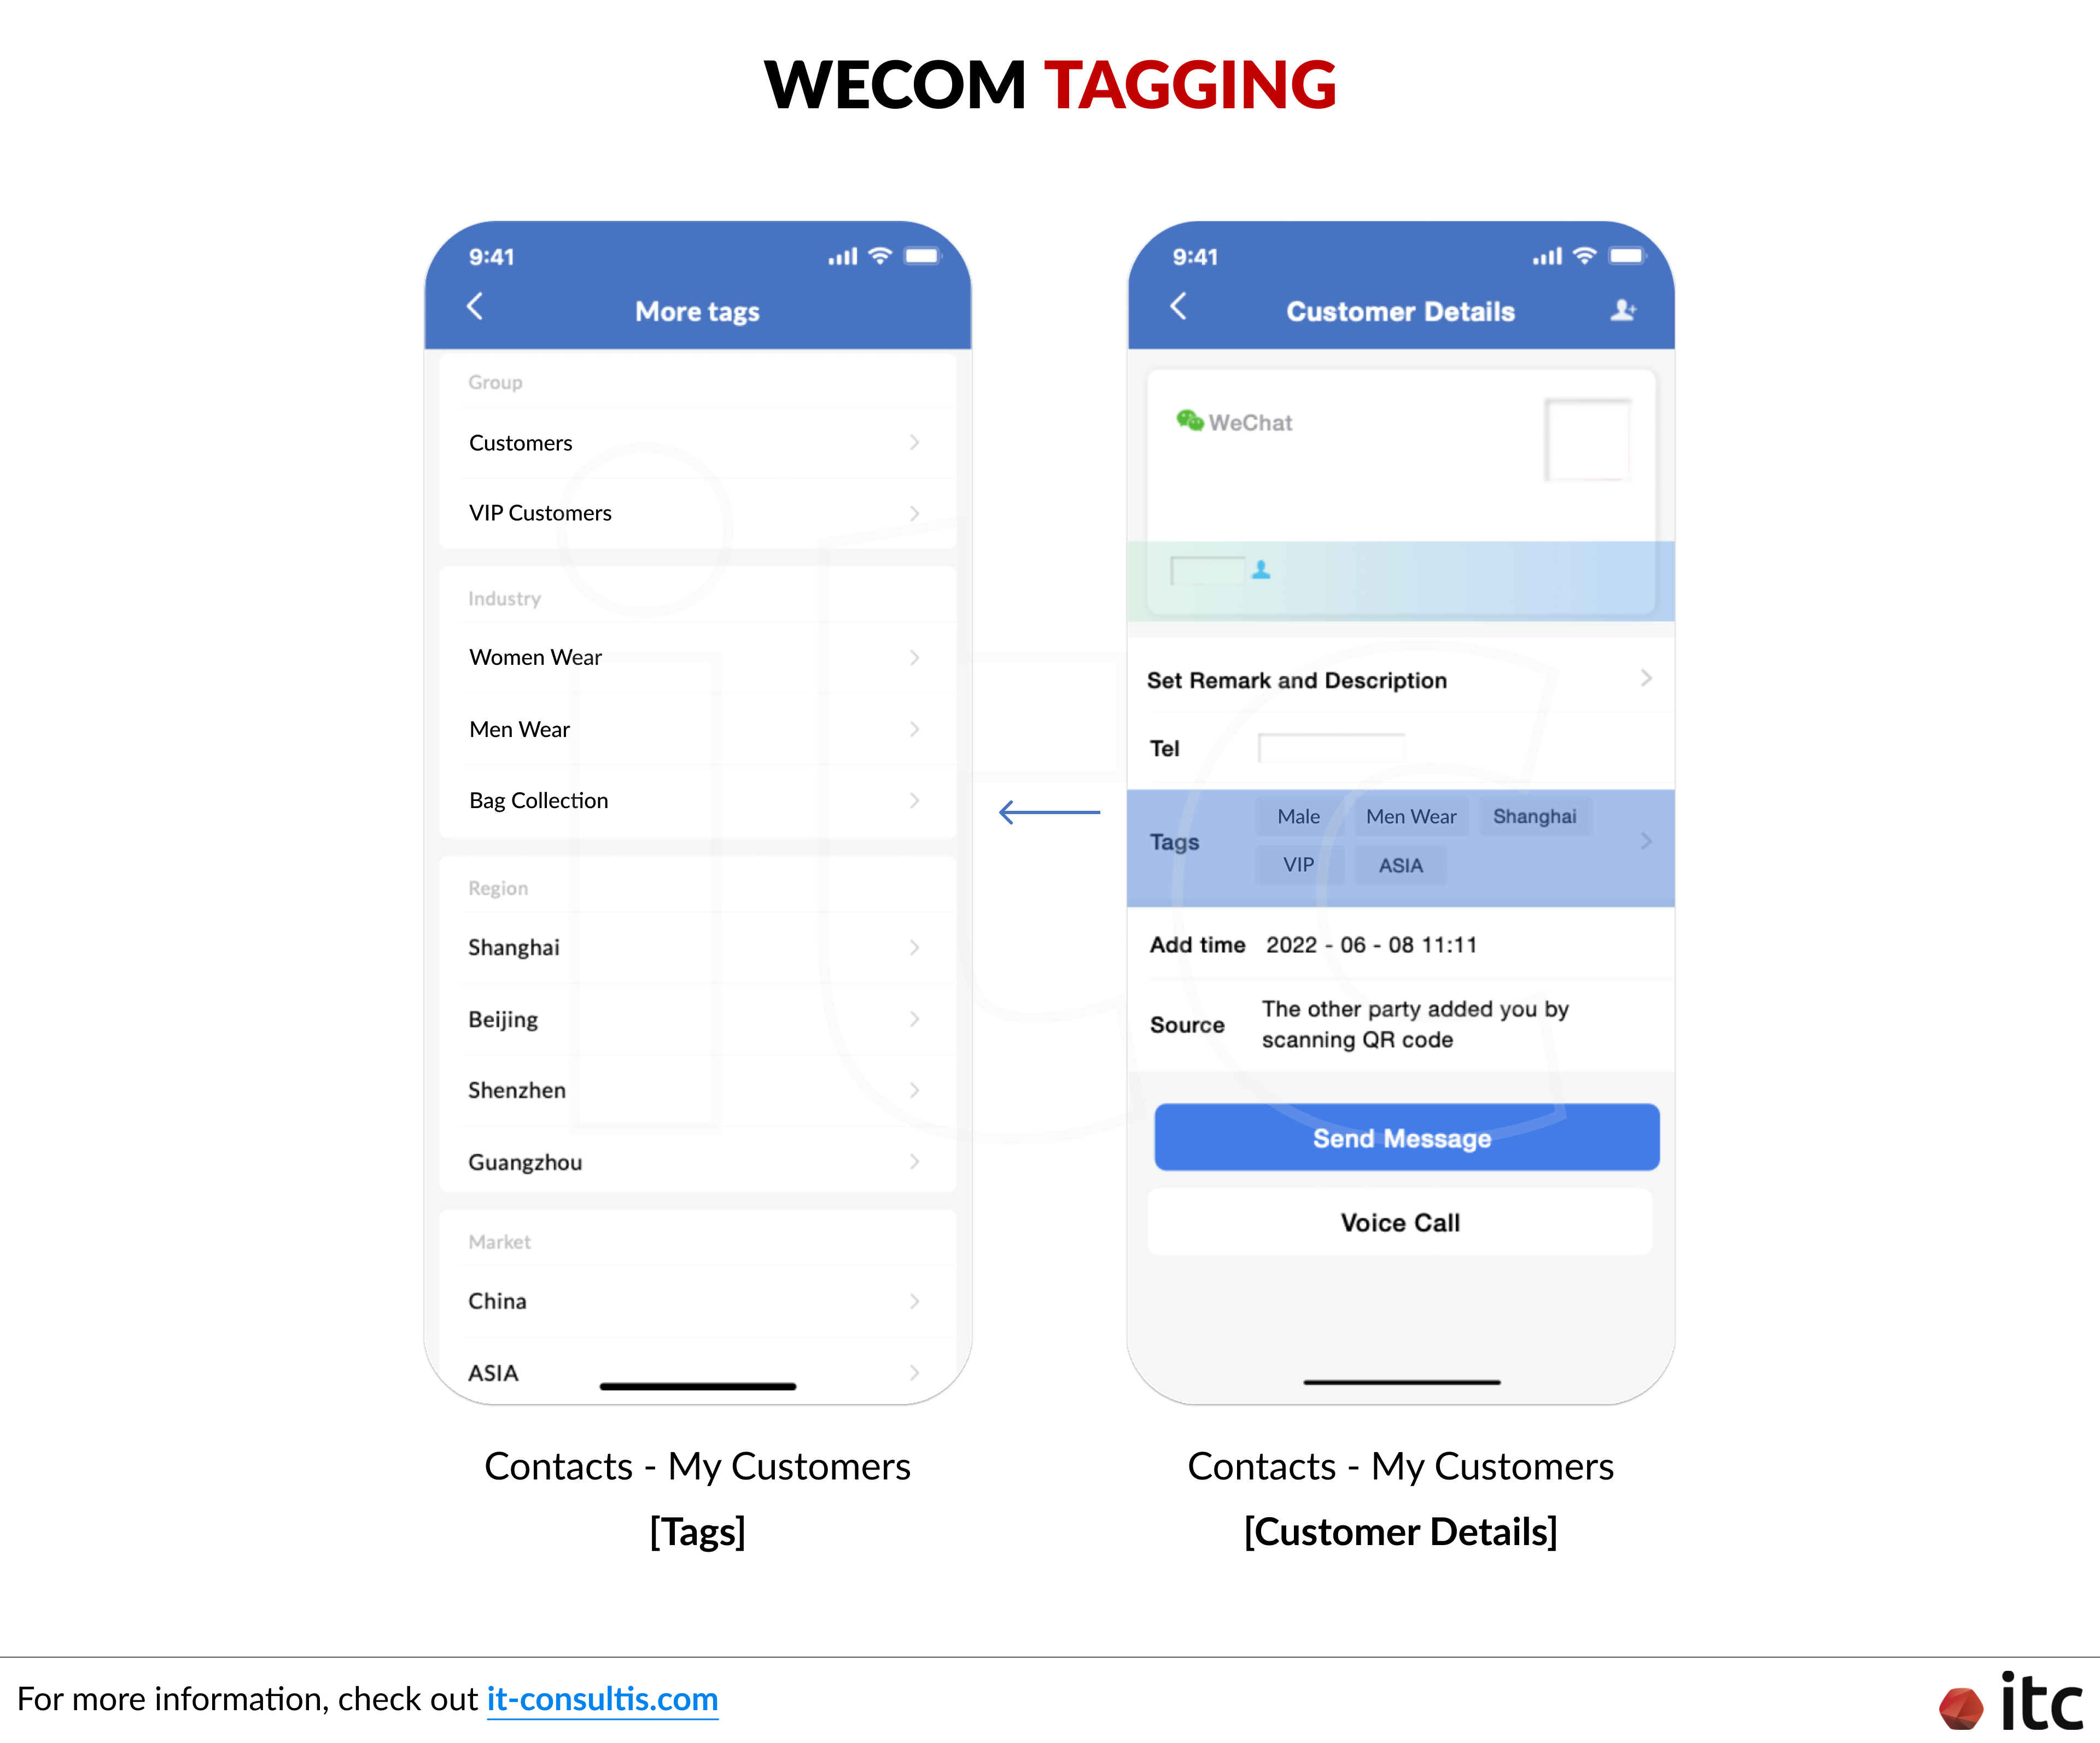 WeCom Tagging is adding relevant tags/labels to each customer for future targeting and retargeting initiatives